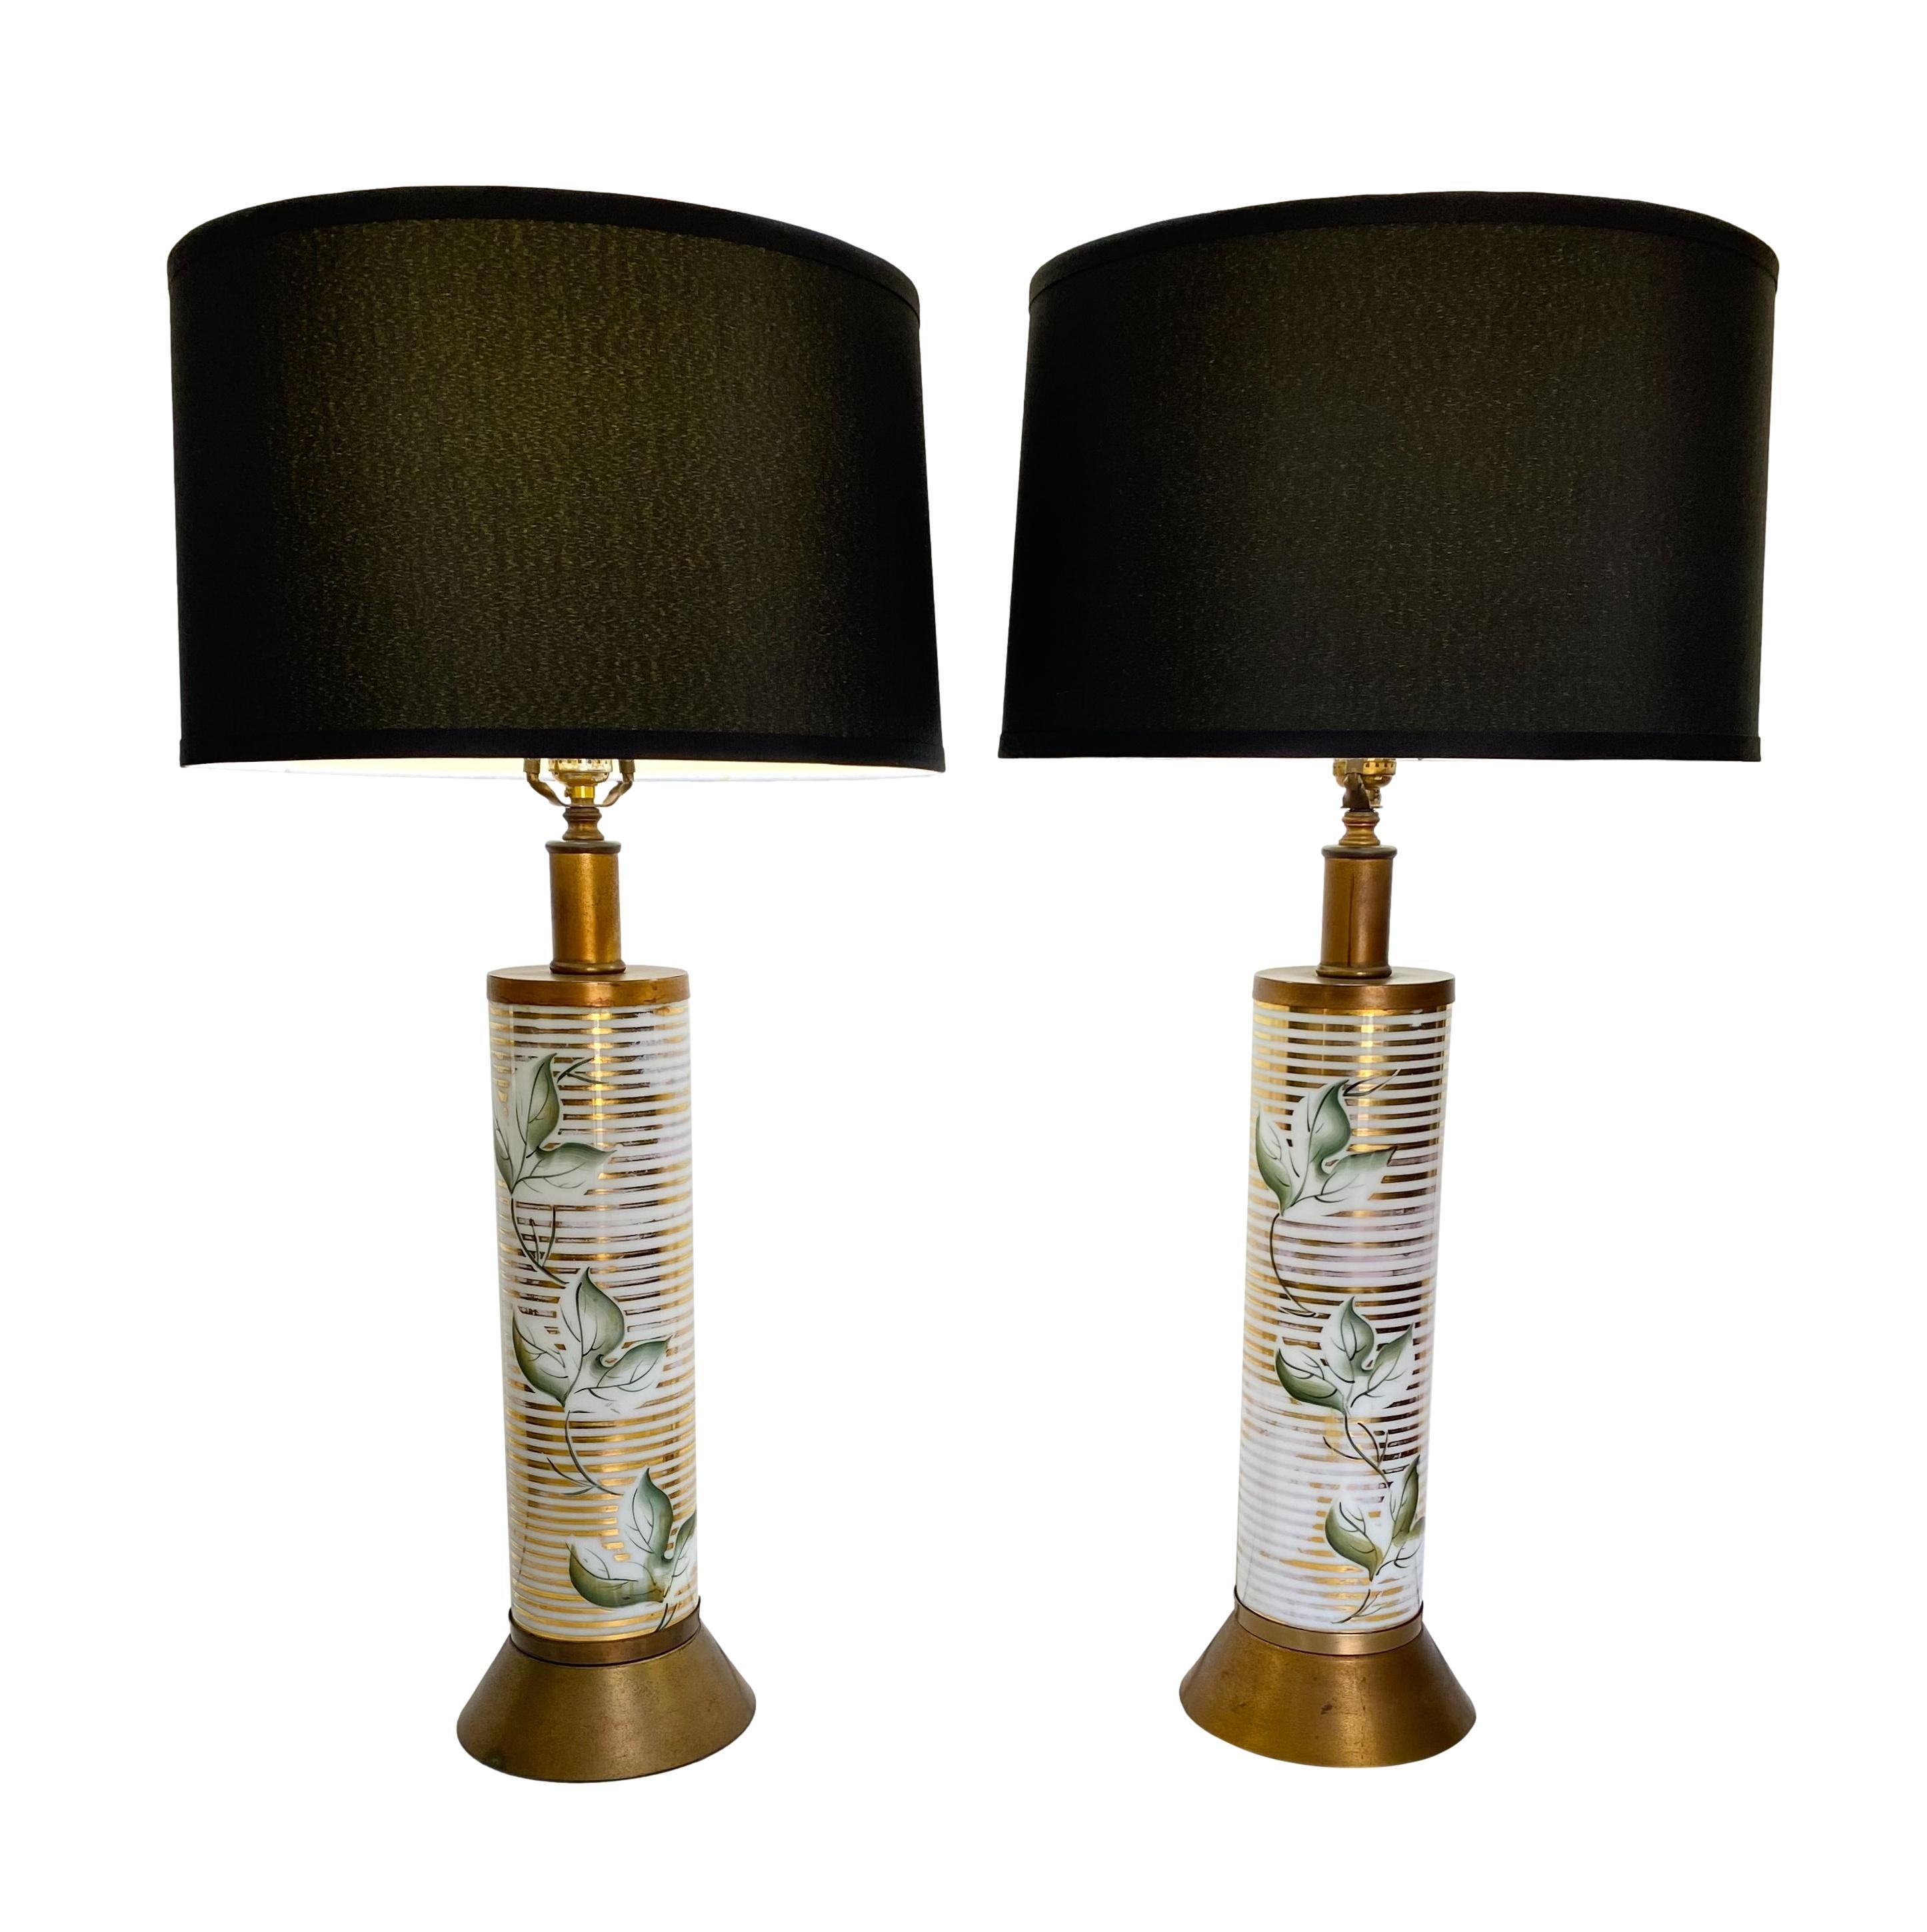 Hollywood Regency 1960s, Hand Painted & Gilded Ceramic Pillar Lamps, a Pair